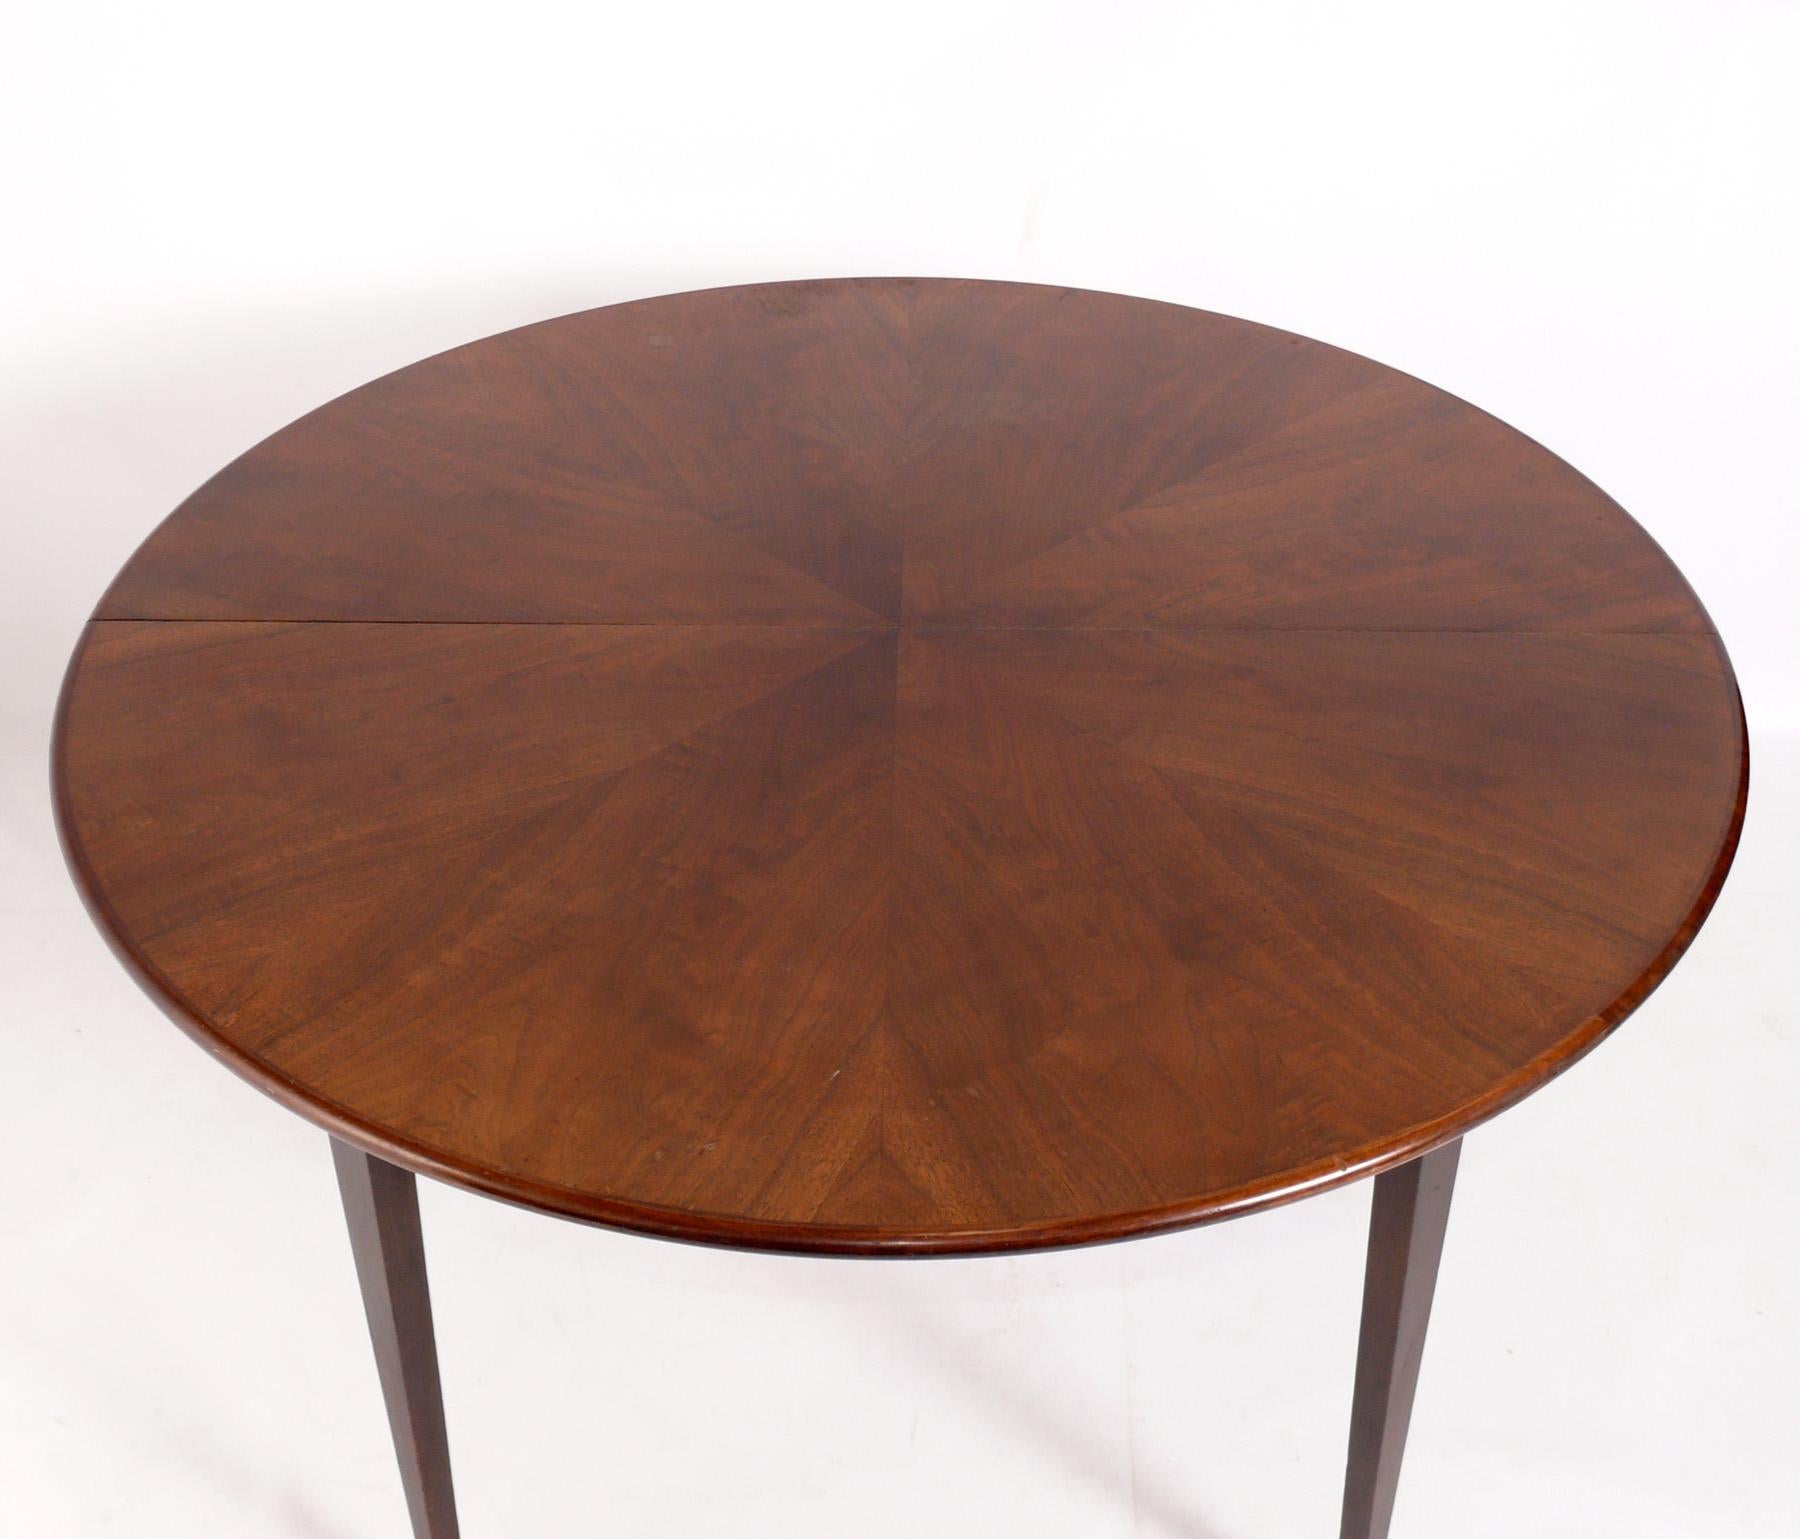 Elegant Mid Century Dining Table, designed by Paul McCobb for Calvin Furniture's Directional Line, American, circa 1960s. The table expands from a 48